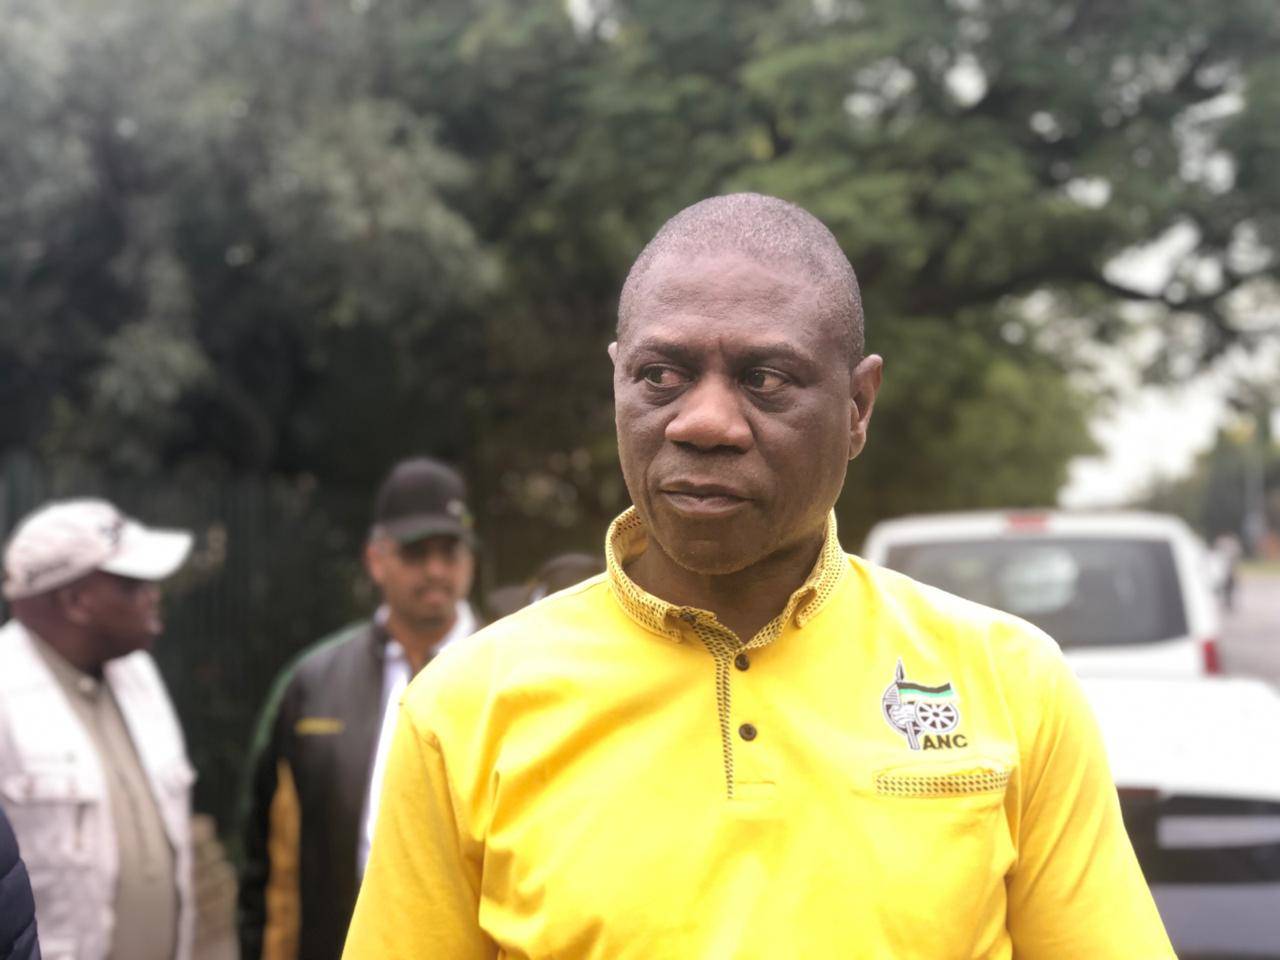 ANC treasury-general Paul Mashatile arrives at Wendywood Secondary School to cast his vote. Picture: Juniour Khumalo/City Press